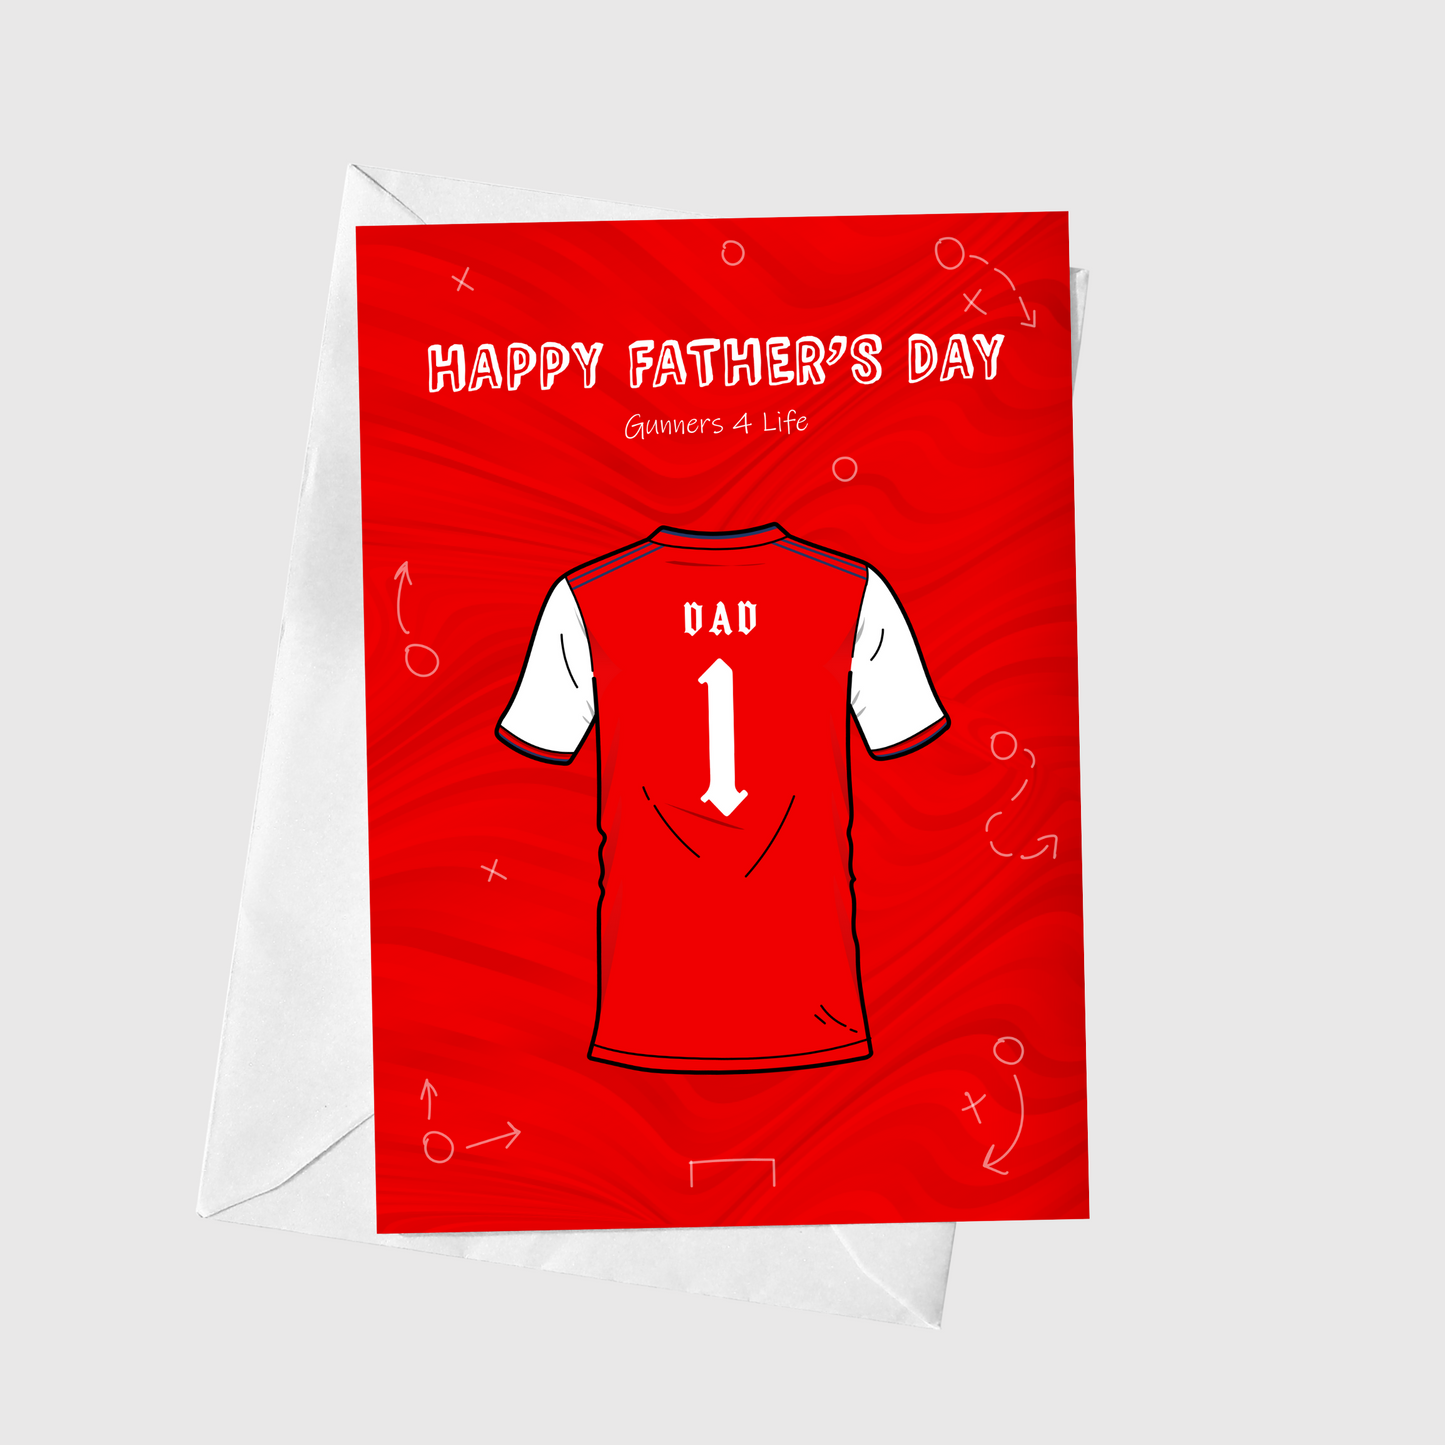 Happy Father's Day - Gunners 4 Life